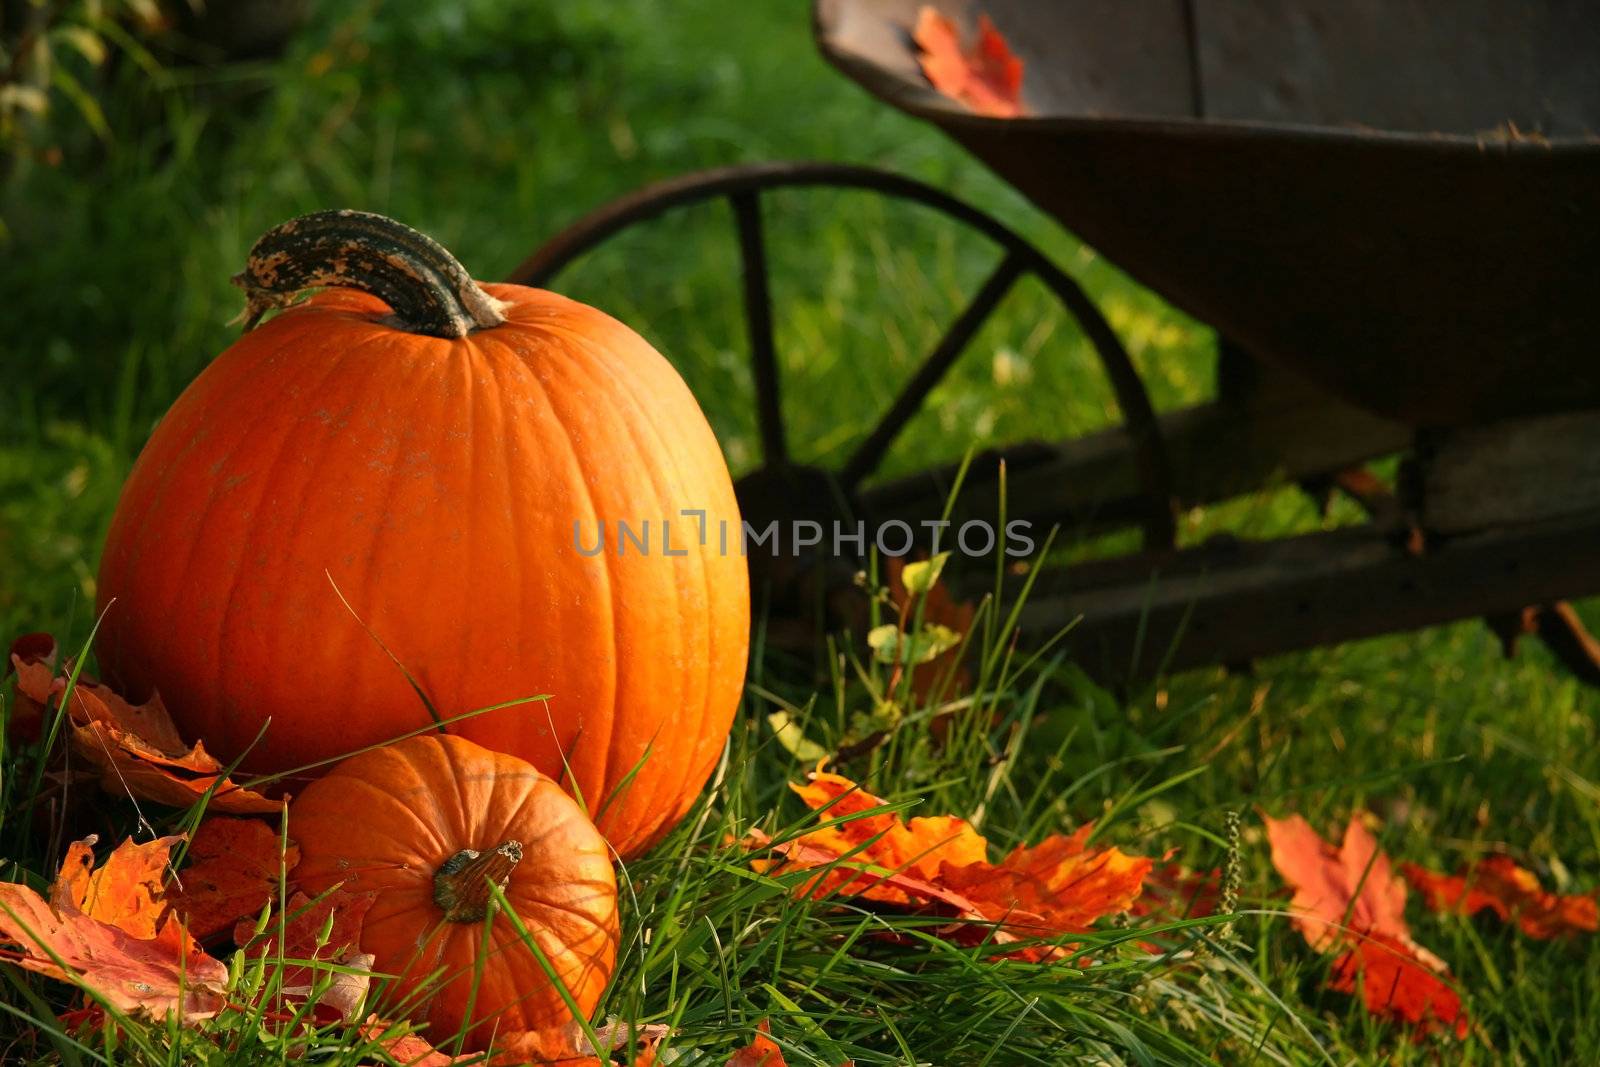 Pumpkins in the grass ready for halloween